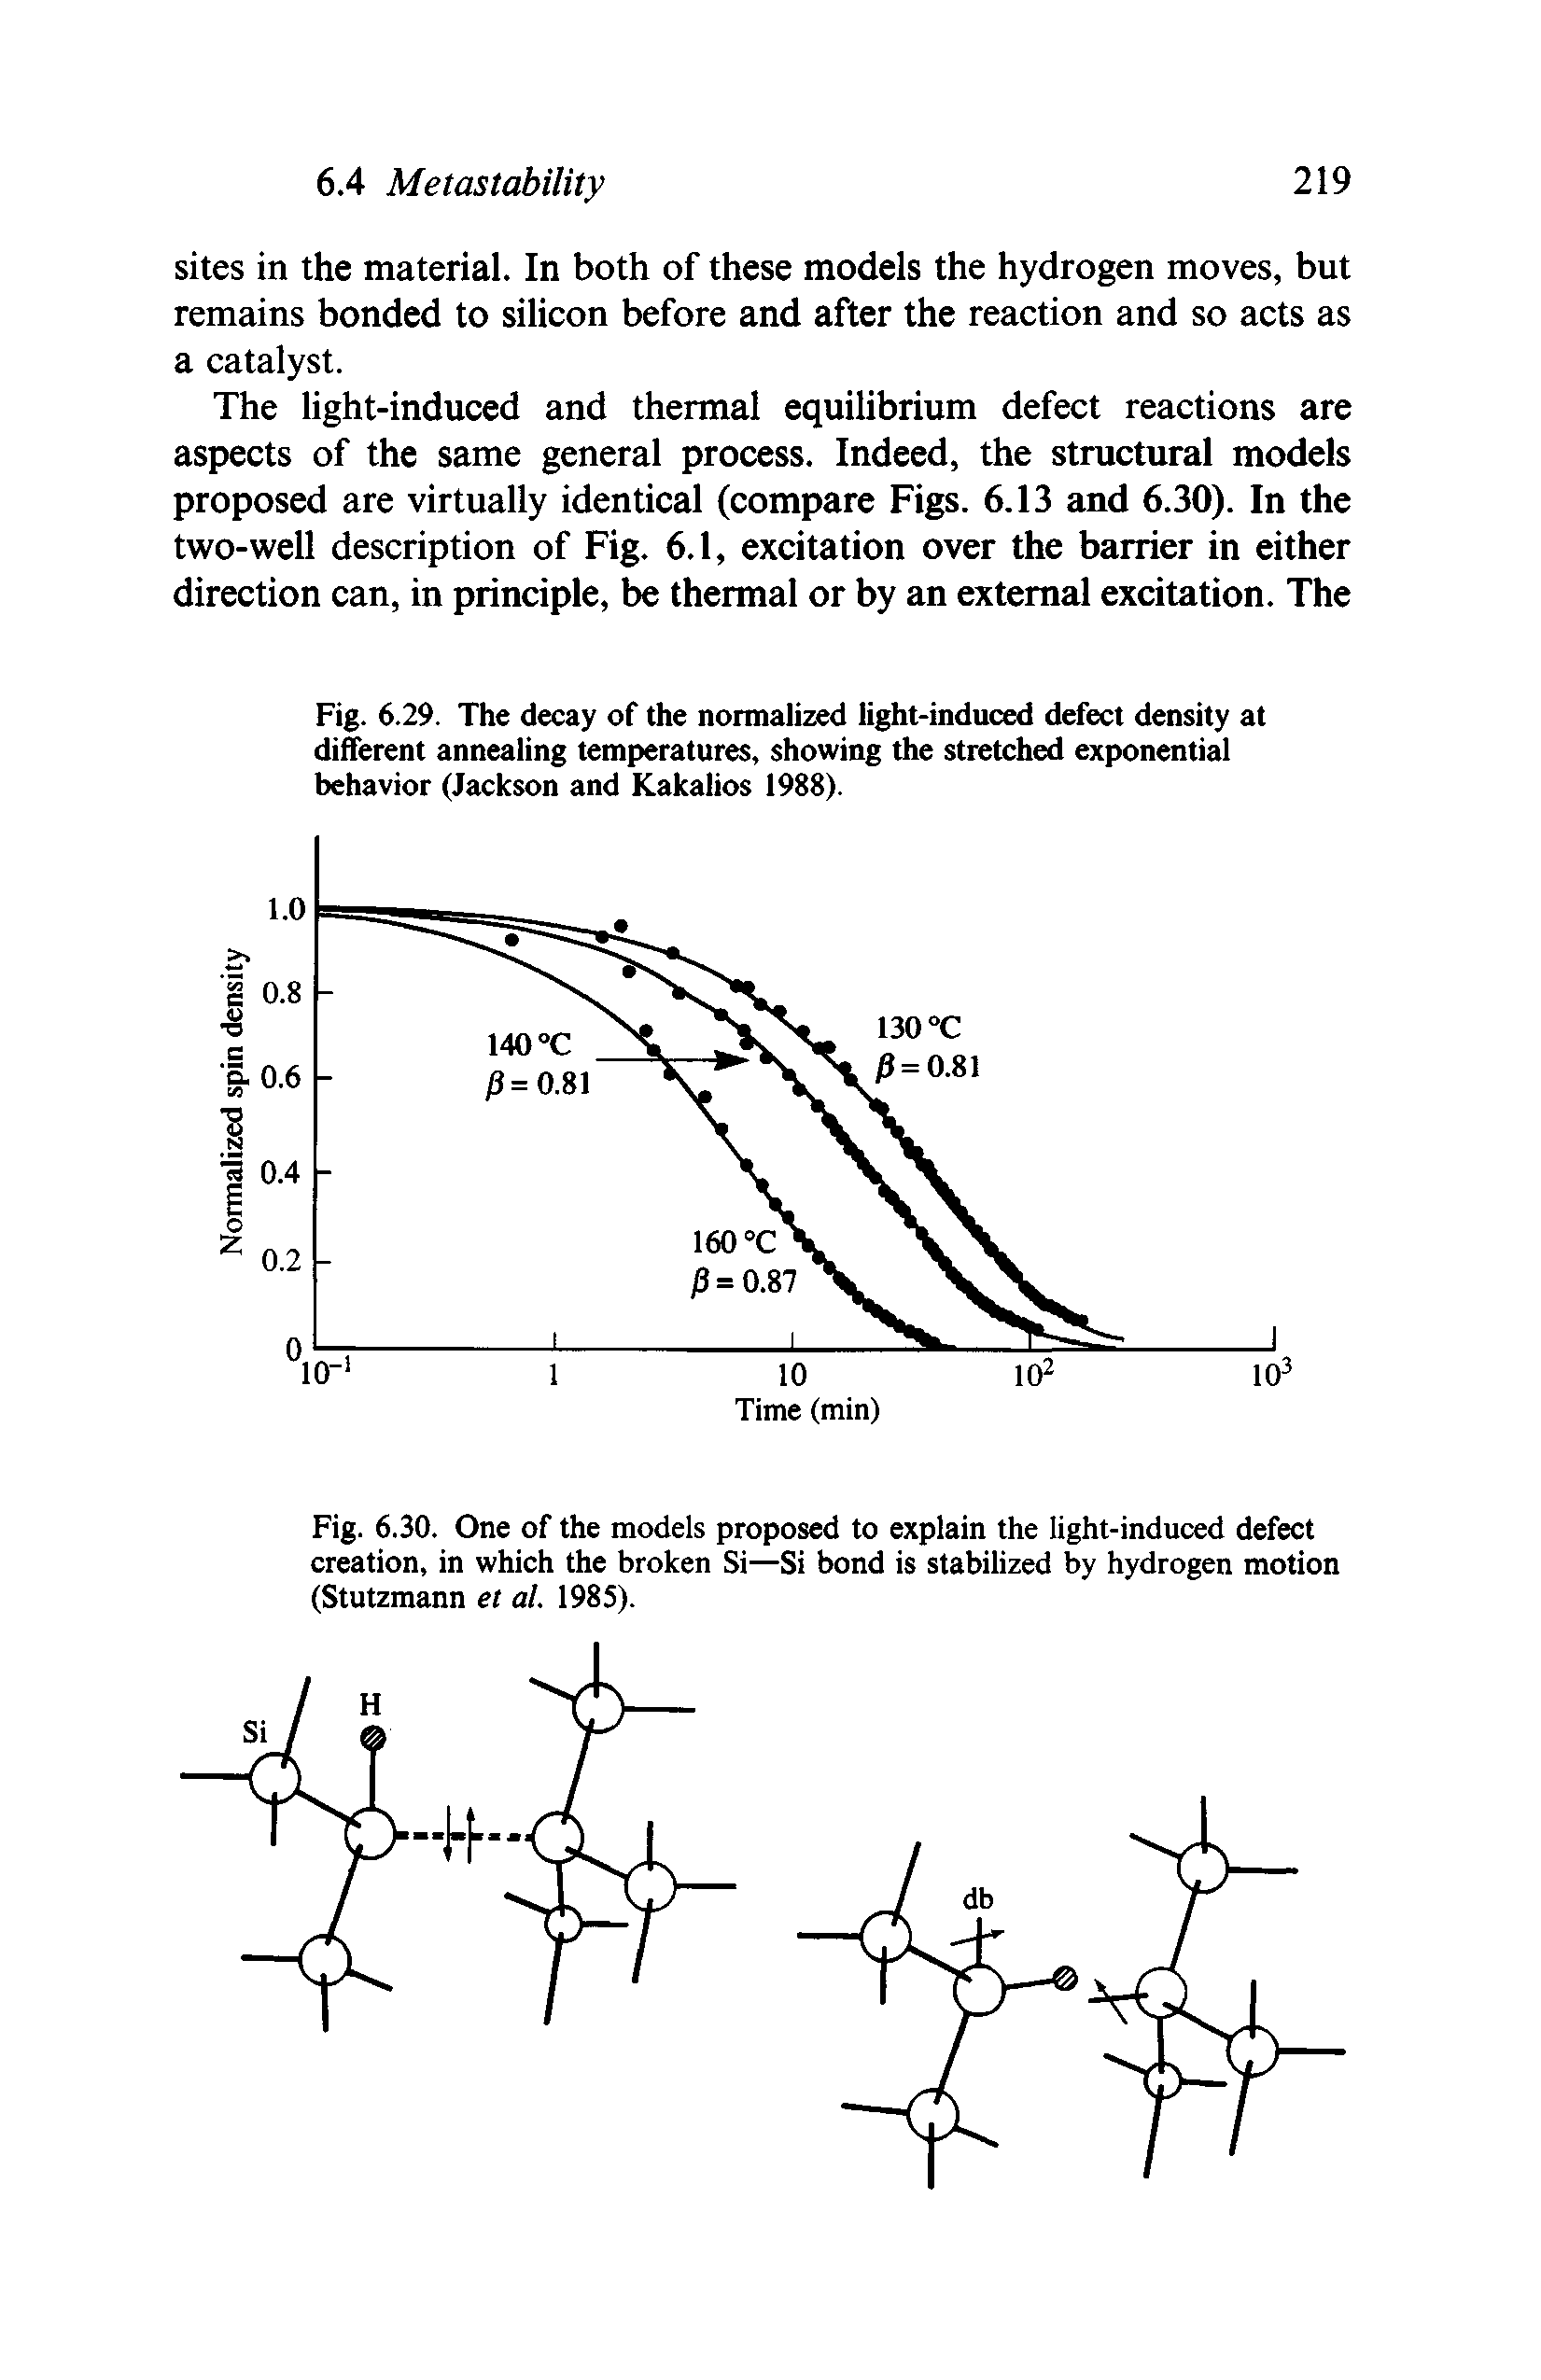 Fig. 6. 29. The decay of the normalized light-induced defect density at different annealing temperatures, showing the stretched exponential behavior (Jackson and Kakalios 1988).